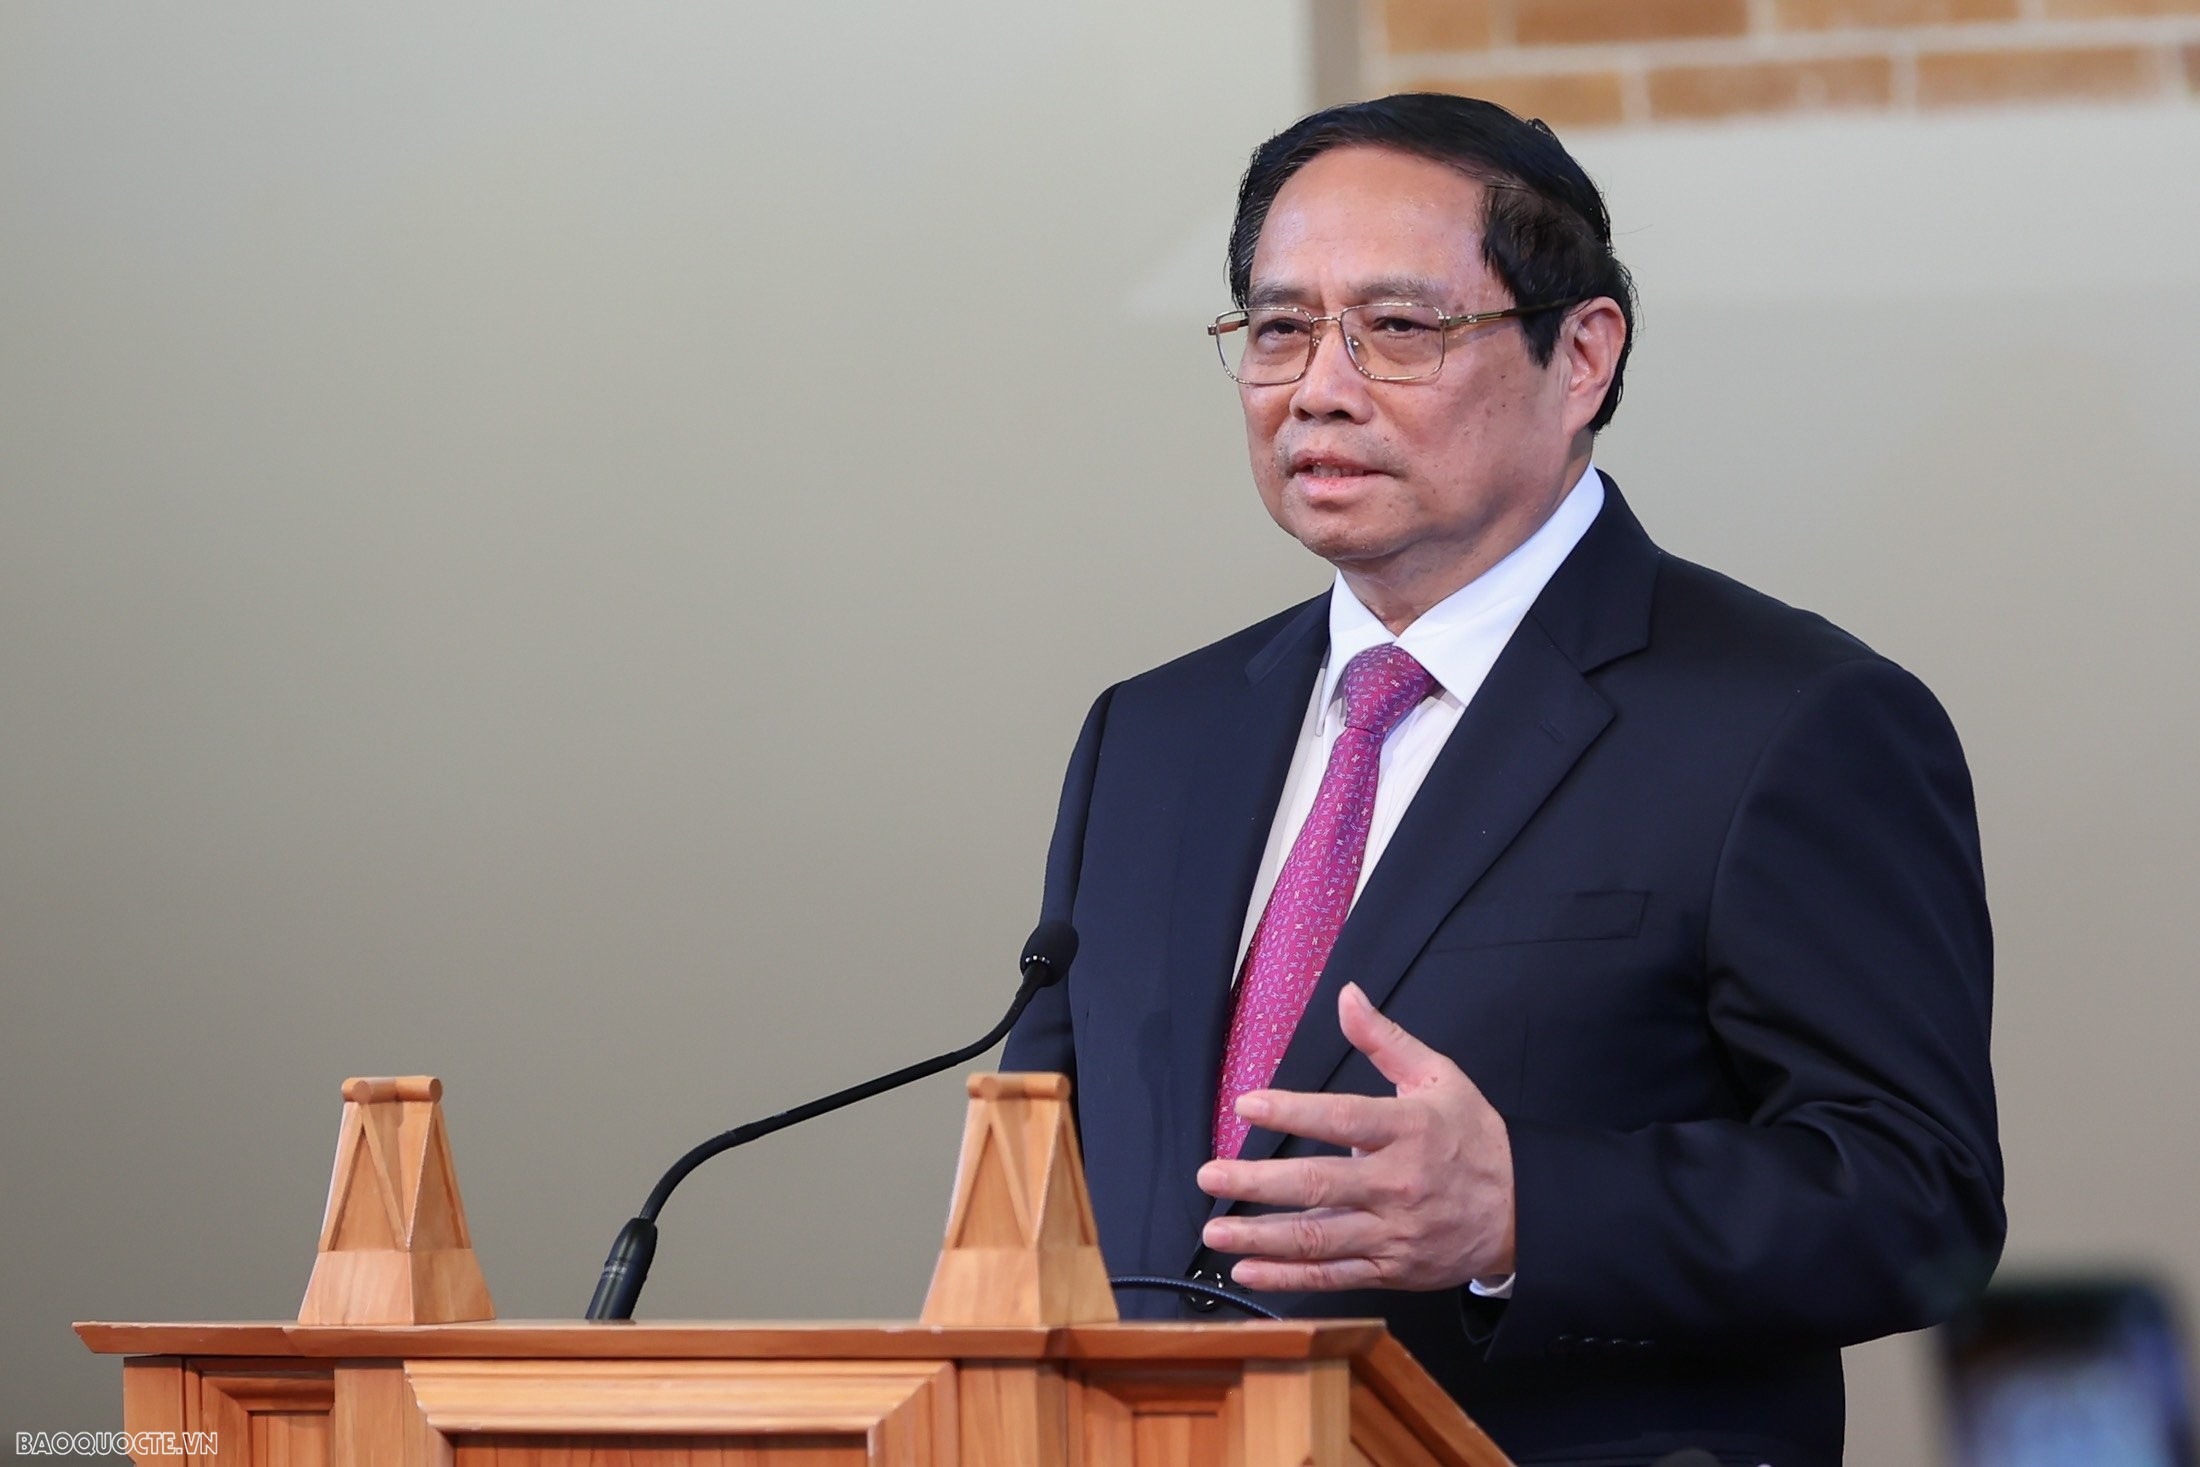 PM Pham Minh Chinh delivers policy speech at Victoria University of Wellington